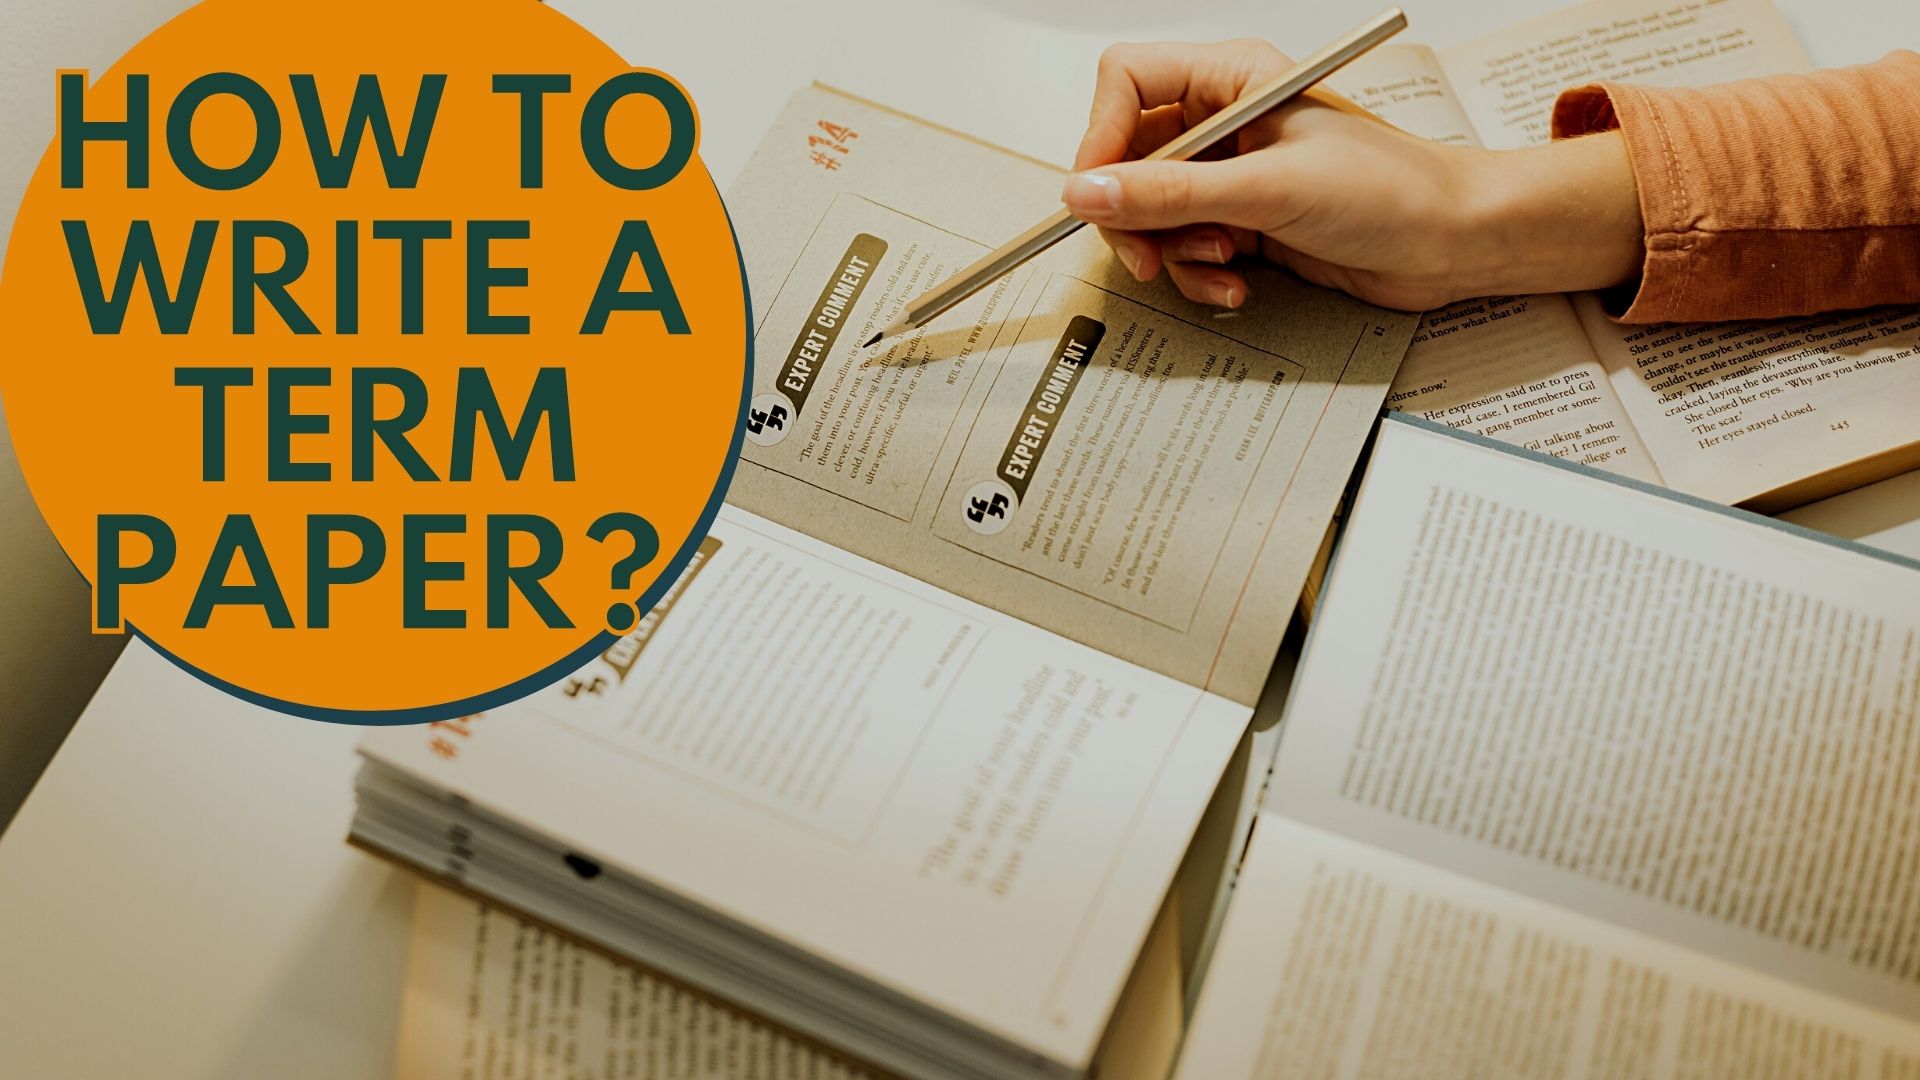 How To Write A Term Paper? Expert Guide From Pros